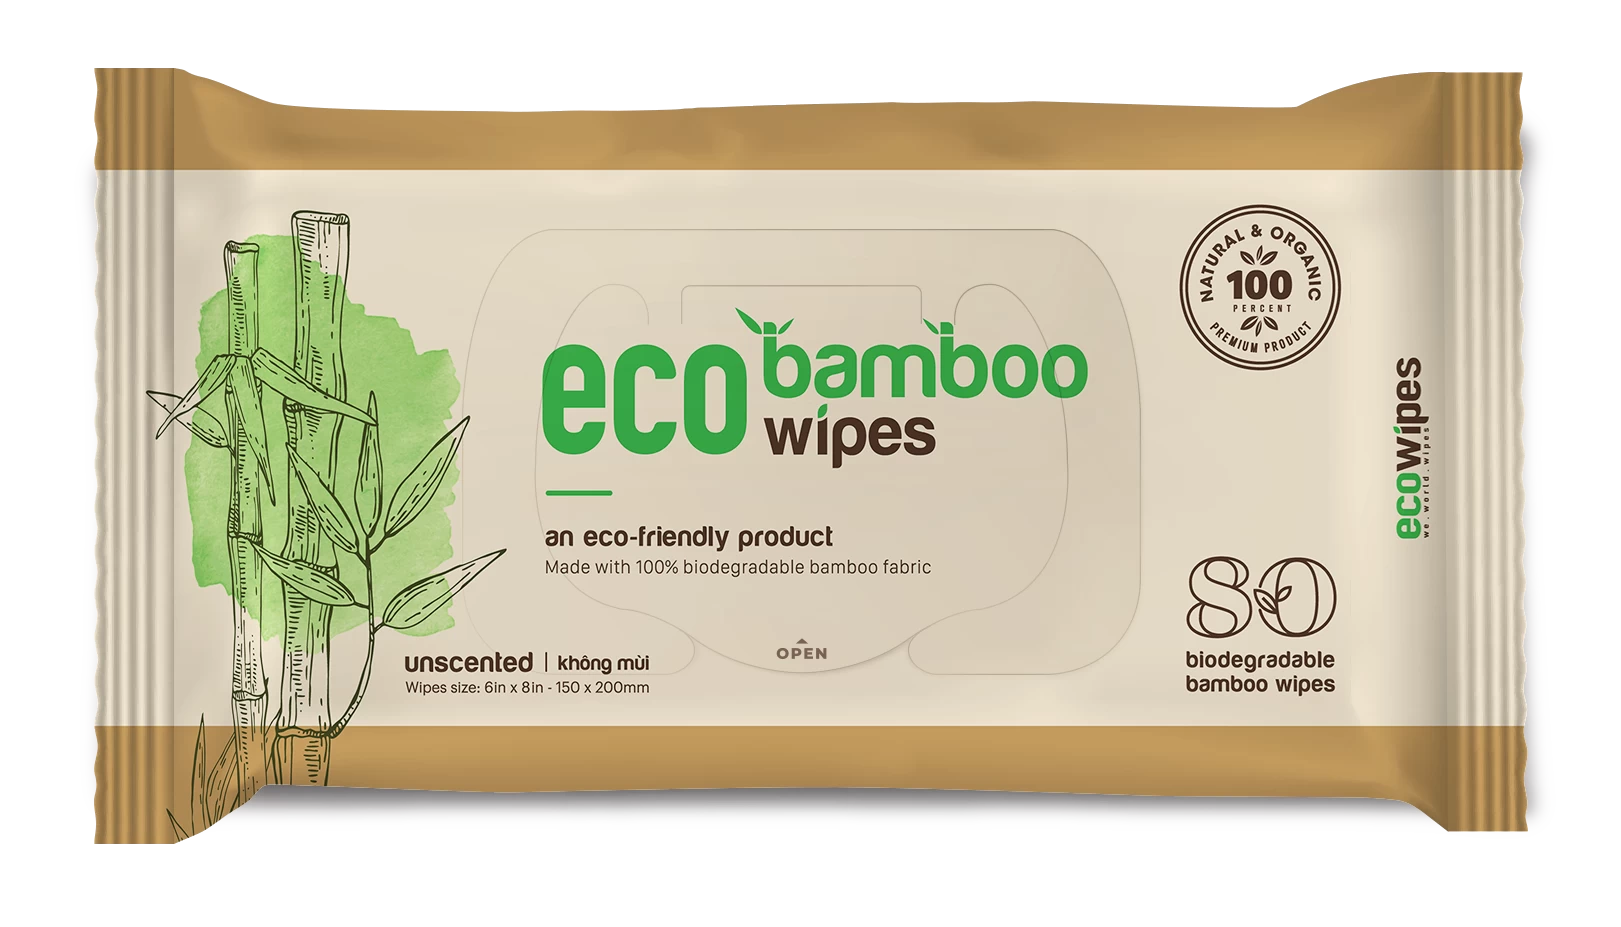 80s Bamboo wipes from Vietnam